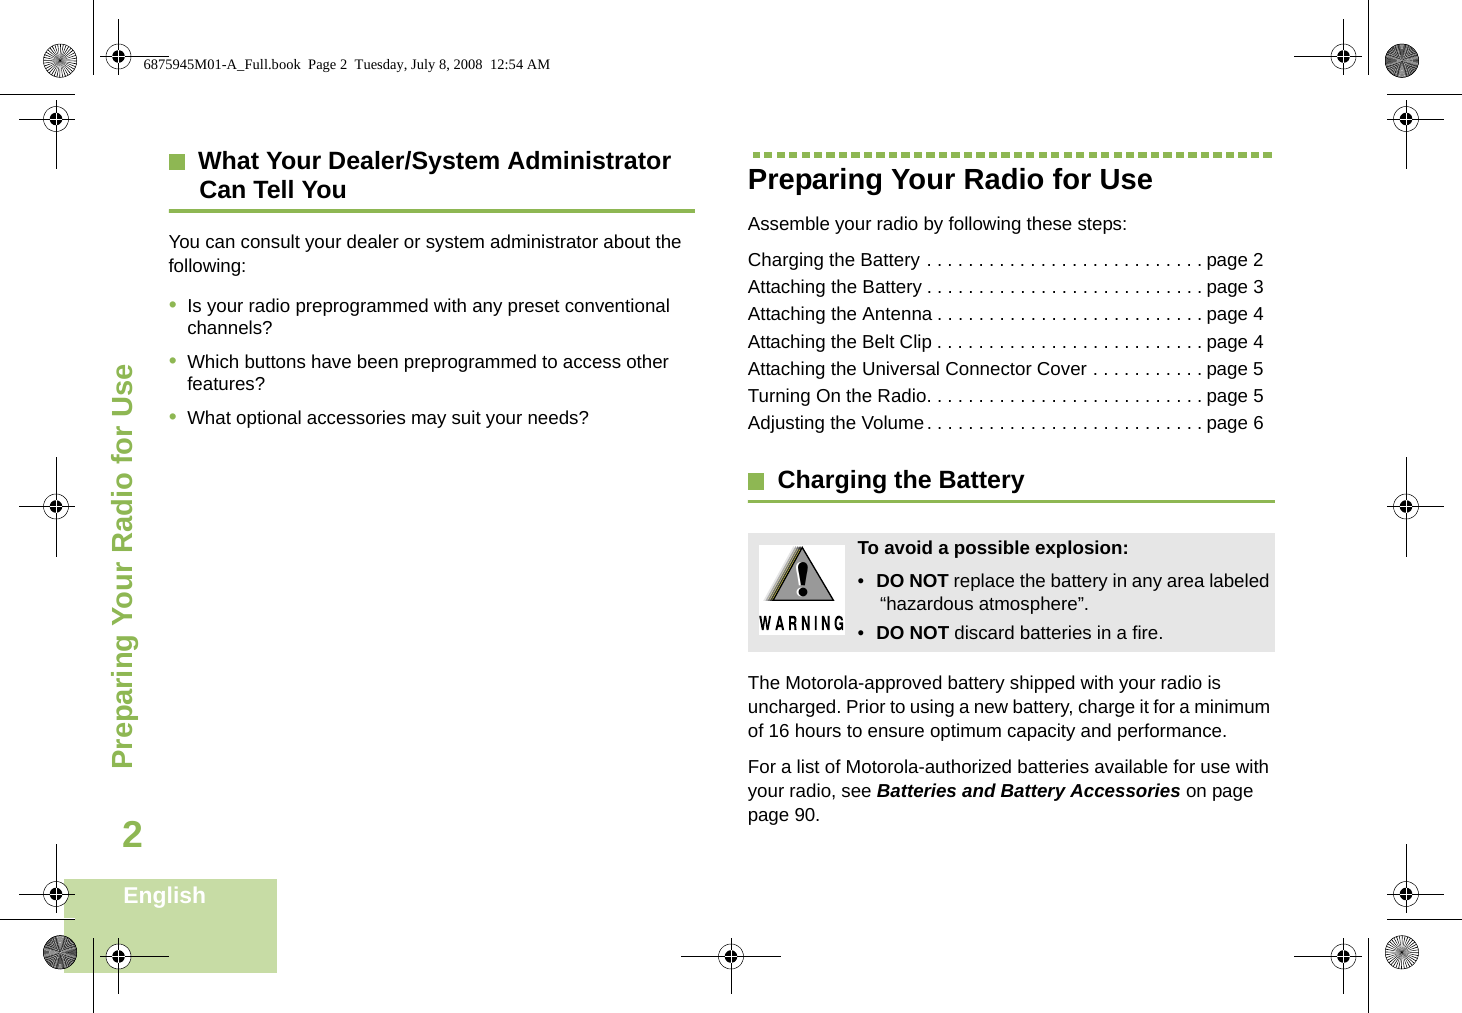 Preparing Your Radio for UseEnglish2What Your Dealer/System AdministratorCan Tell YouYou can consult your dealer or system administrator about the following:•Is your radio preprogrammed with any preset conventional channels?•Which buttons have been preprogrammed to access other features? •What optional accessories may suit your needs?Preparing Your Radio for UseAssemble your radio by following these steps:Charging the Battery . . . . . . . . . . . . . . . . . . . . . . . . . . . page 2Attaching the Battery . . . . . . . . . . . . . . . . . . . . . . . . . . . page 3Attaching the Antenna . . . . . . . . . . . . . . . . . . . . . . . . . . page 4Attaching the Belt Clip . . . . . . . . . . . . . . . . . . . . . . . . . . page 4Attaching the Universal Connector Cover . . . . . . . . . . . page 5Turning On the Radio. . . . . . . . . . . . . . . . . . . . . . . . . . . page 5Adjusting the Volume. . . . . . . . . . . . . . . . . . . . . . . . . . . page 6Charging the BatteryThe Motorola-approved battery shipped with your radio is uncharged. Prior to using a new battery, charge it for a minimum of 16 hours to ensure optimum capacity and performance. For a list of Motorola-authorized batteries available for use with your radio, see Batteries and Battery Accessories on page page 90.To avoid a possible explosion:•DO NOT replace the battery in any area labeled “hazardous atmosphere”.•DO NOT discard batteries in a fire.!!6875945M01-A_Full.book  Page 2  Tuesday, July 8, 2008  12:54 AM